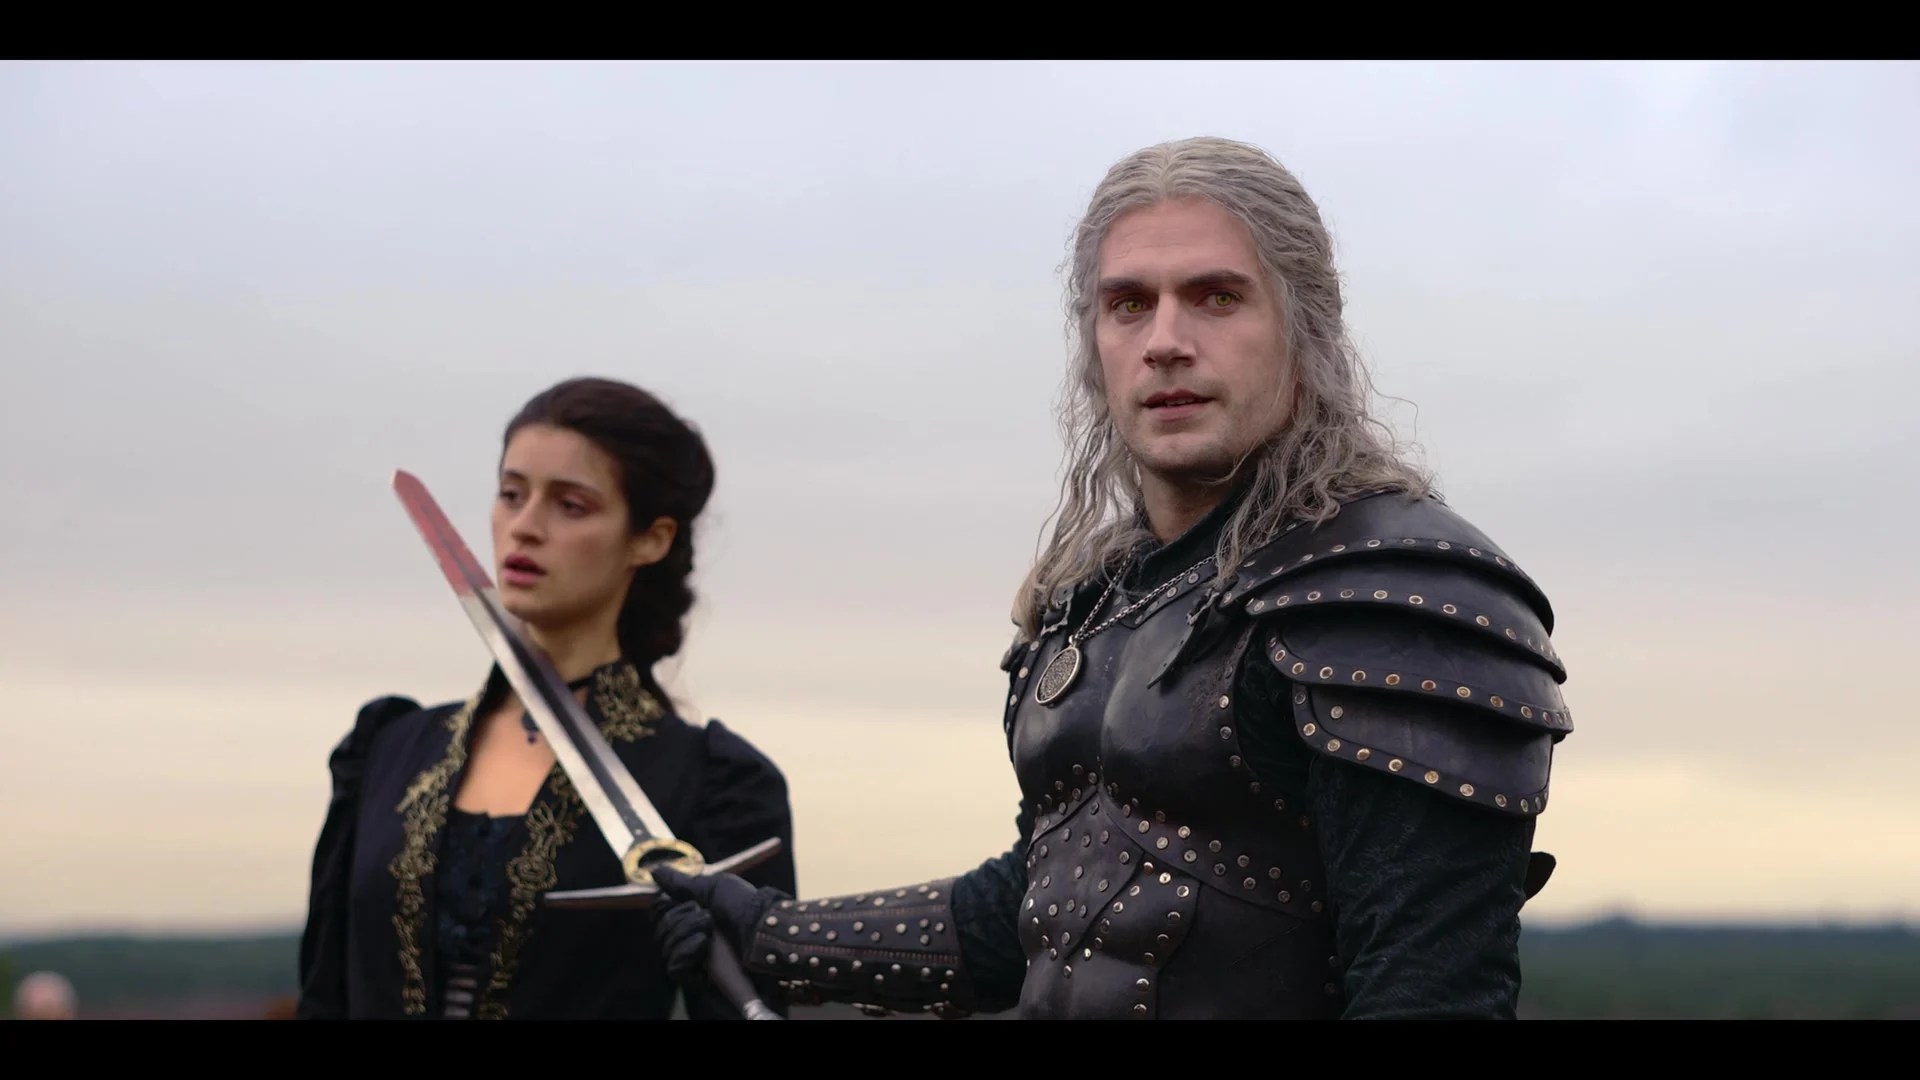 Geralt (Henry Cavill) is not happy with Yennefer's (Anya Chalotra) stubborn nature in The Witcher Season 2 Episode 7 “Voleth Meir” (2021) via Netflix